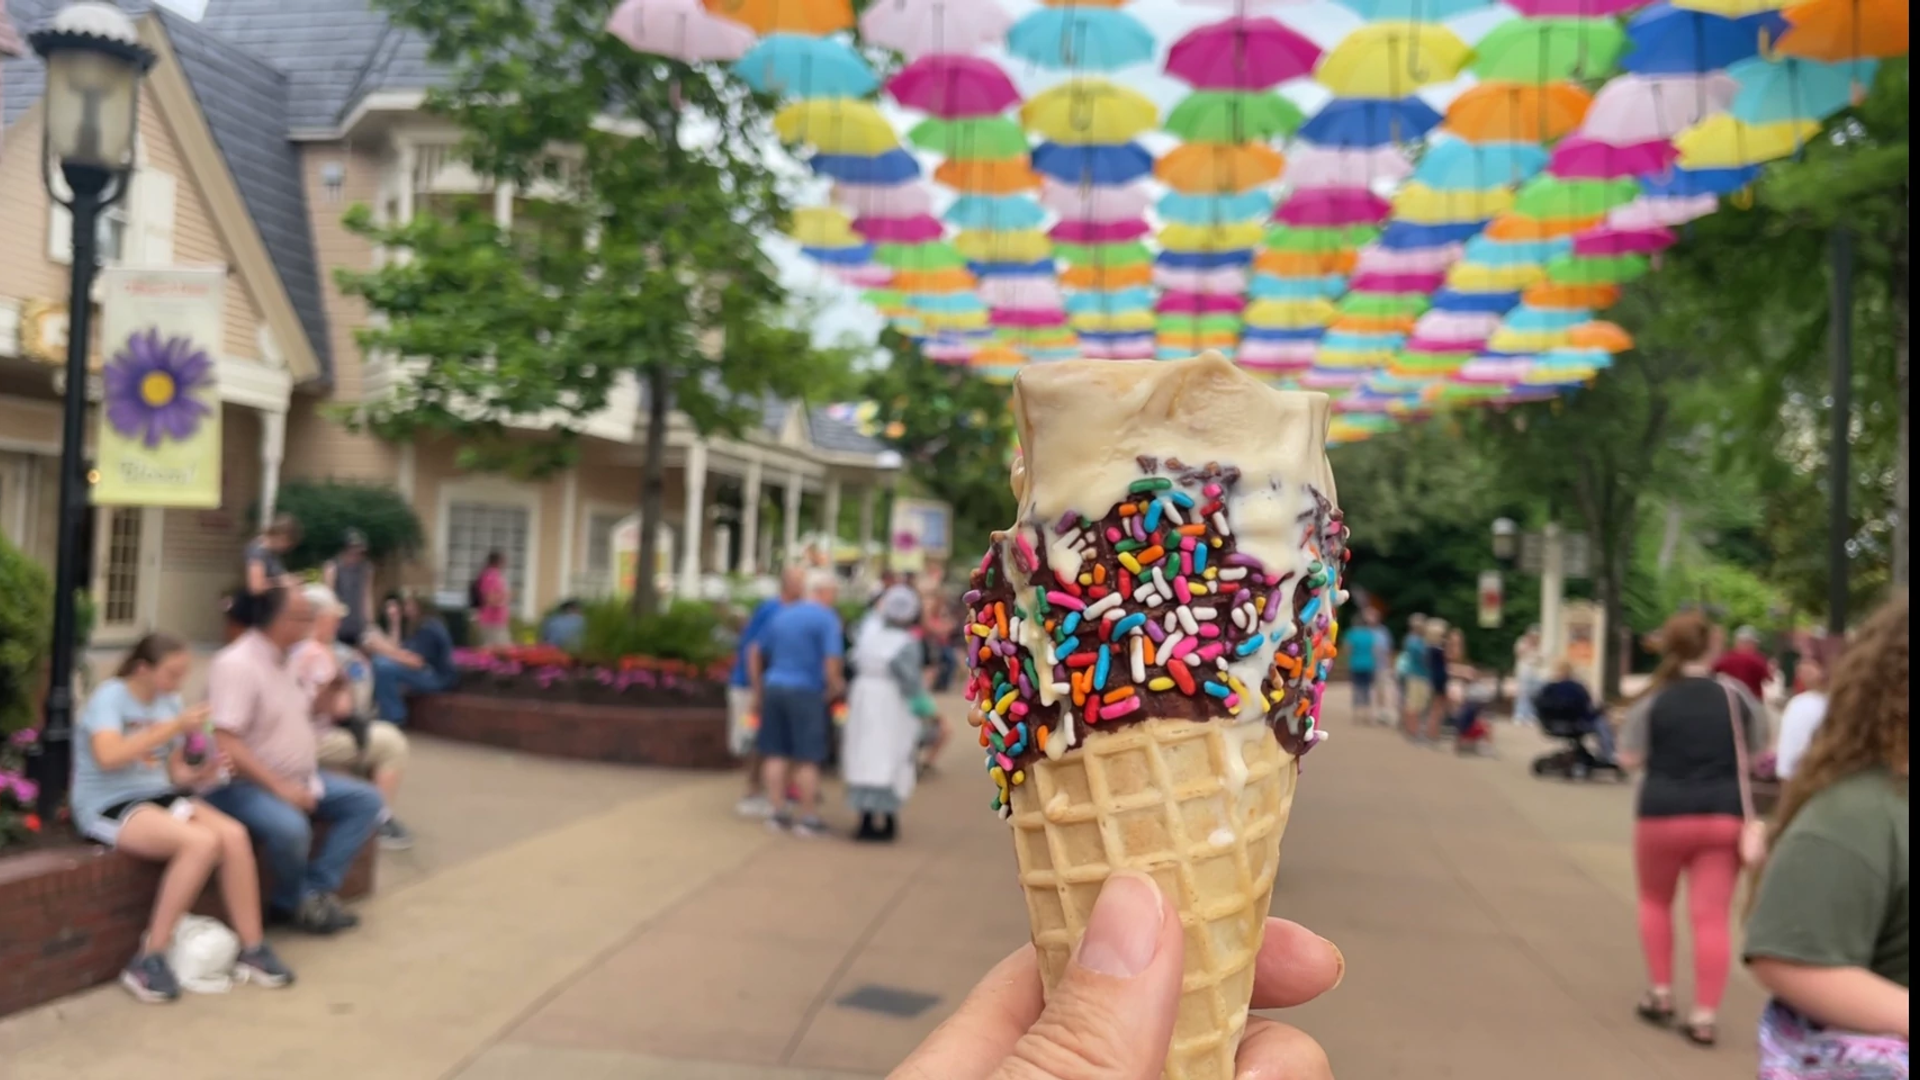 Favorite Spots to Find Ice Cream at Dollywood